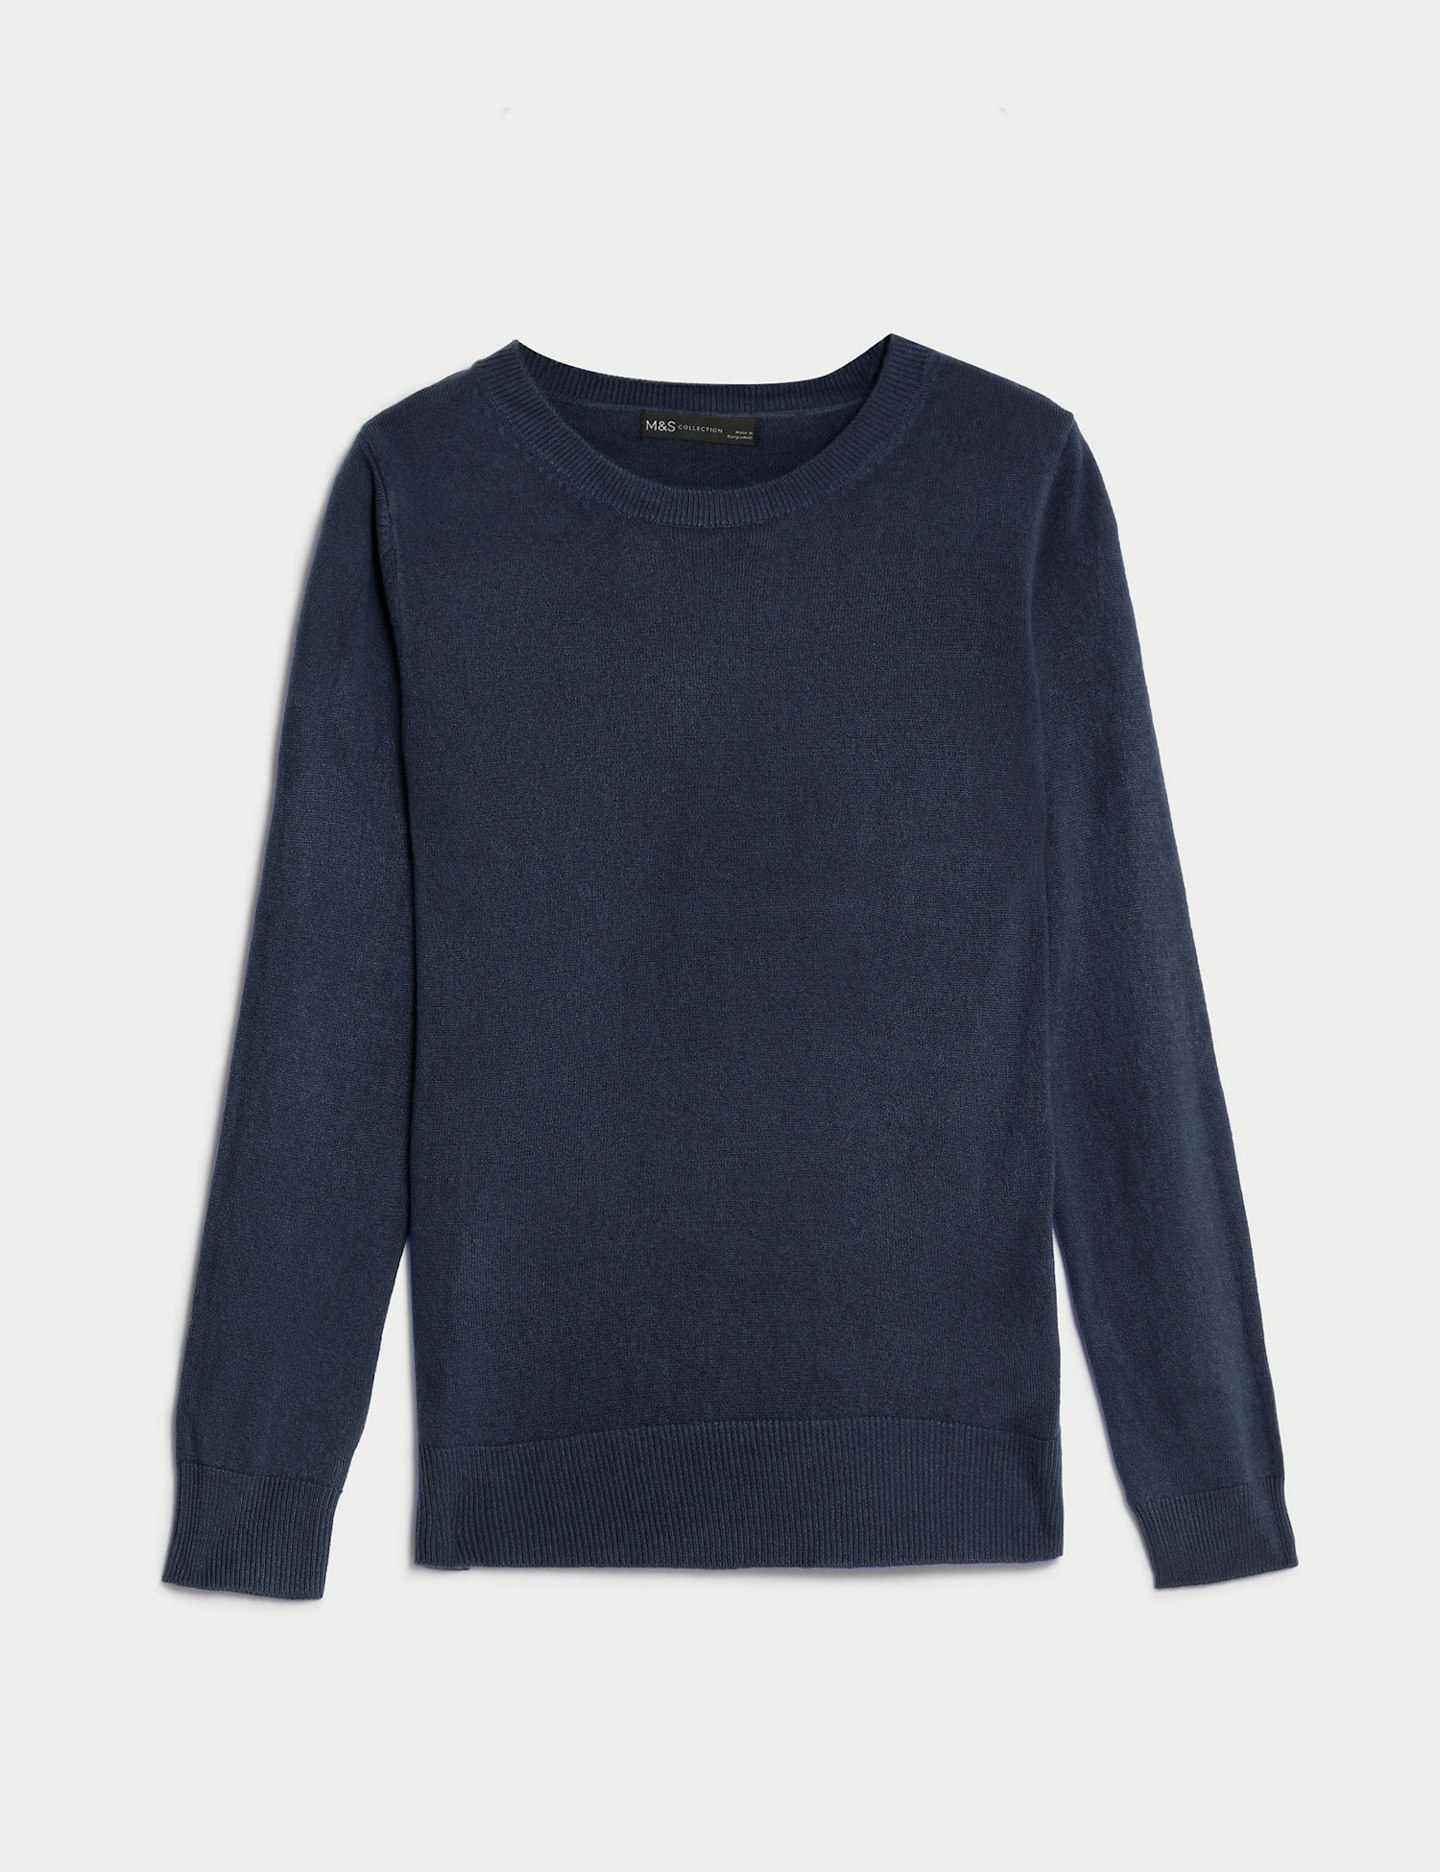 M&S jumper workwear outfits